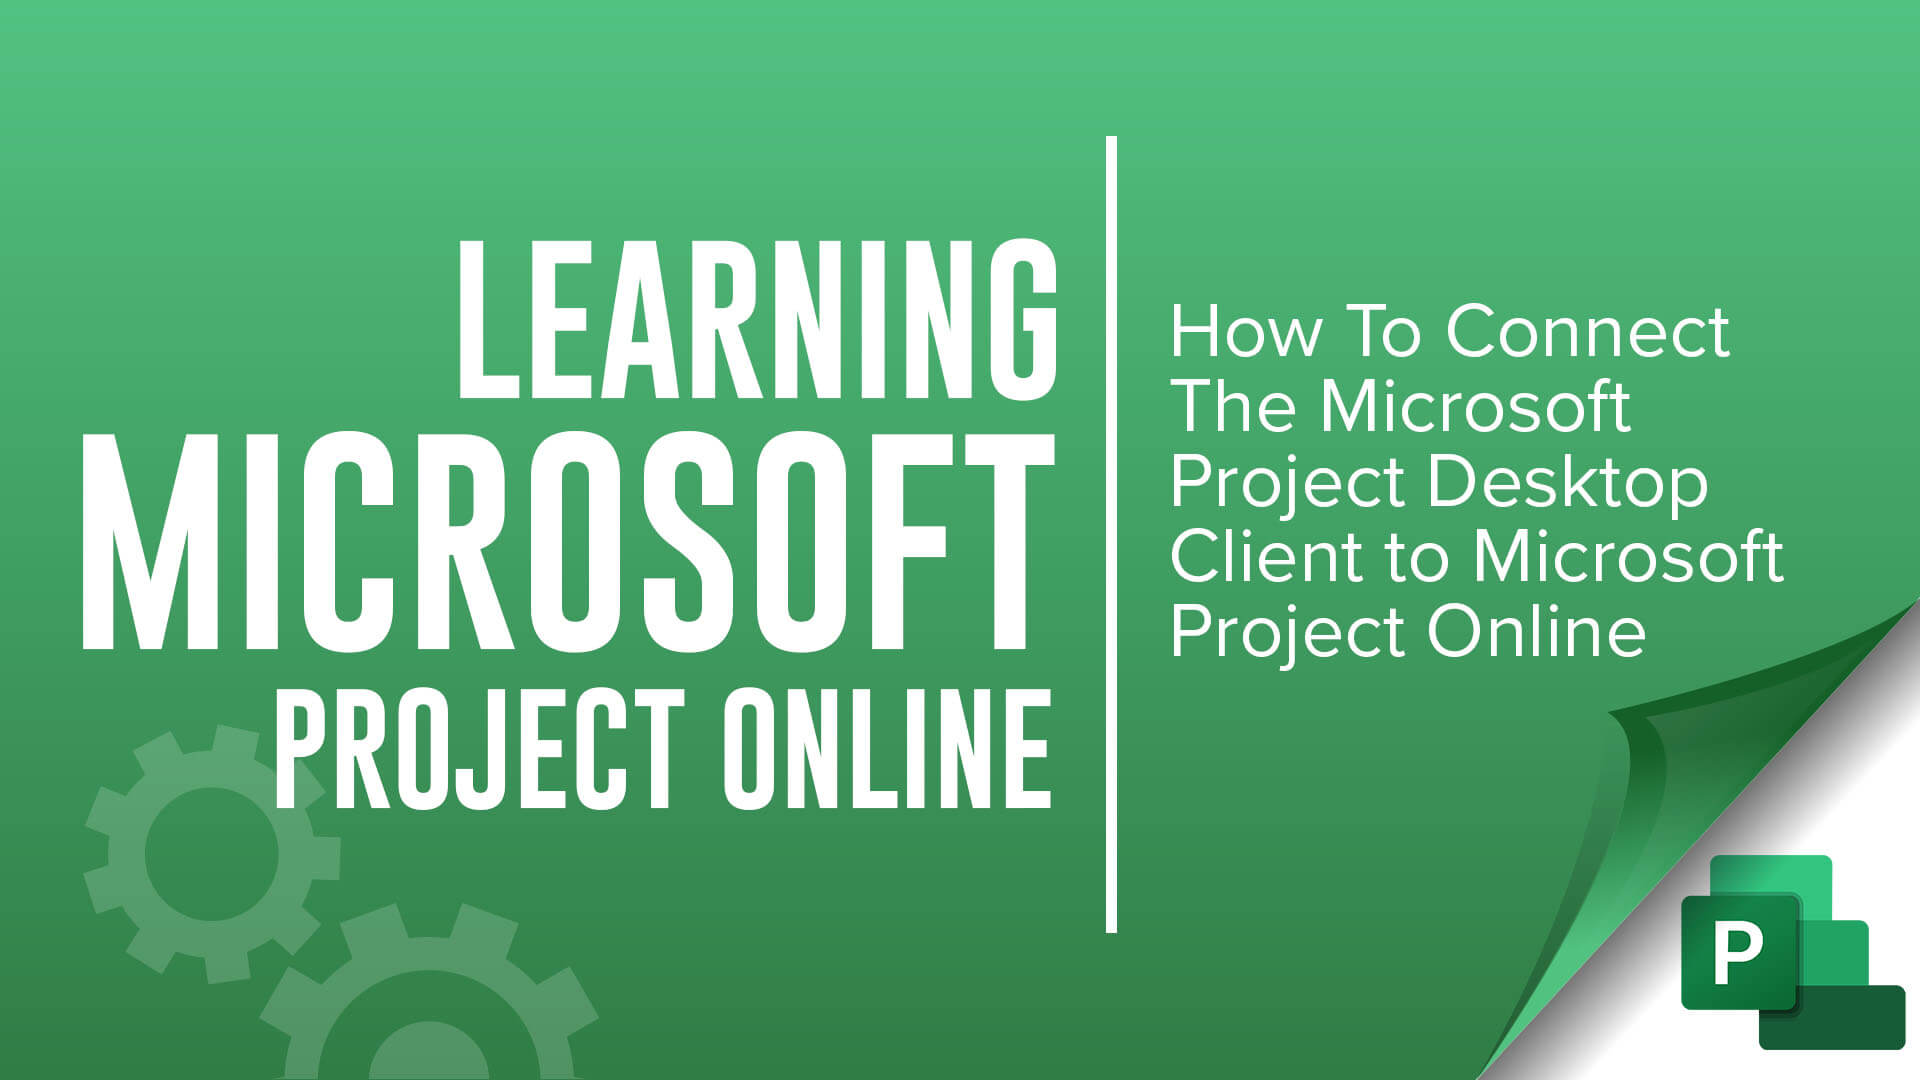 learning Microsoft Project Online - how to connect the microsoft project desktop client to microsoft project online